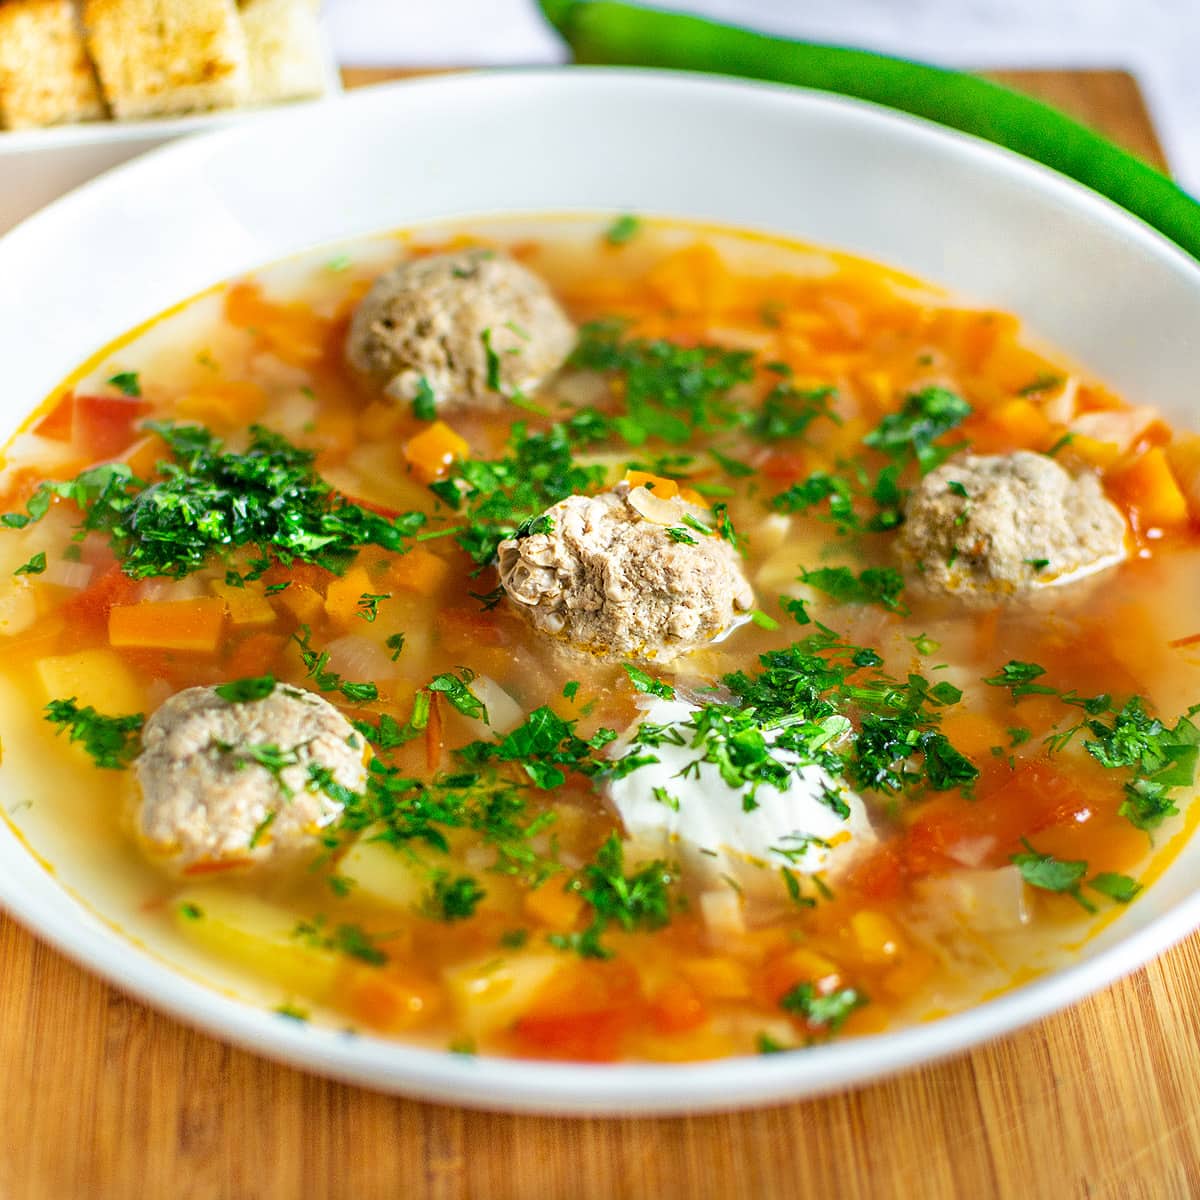 Soup with meatballs and vegetables in a white plate on a wooden cutting board.